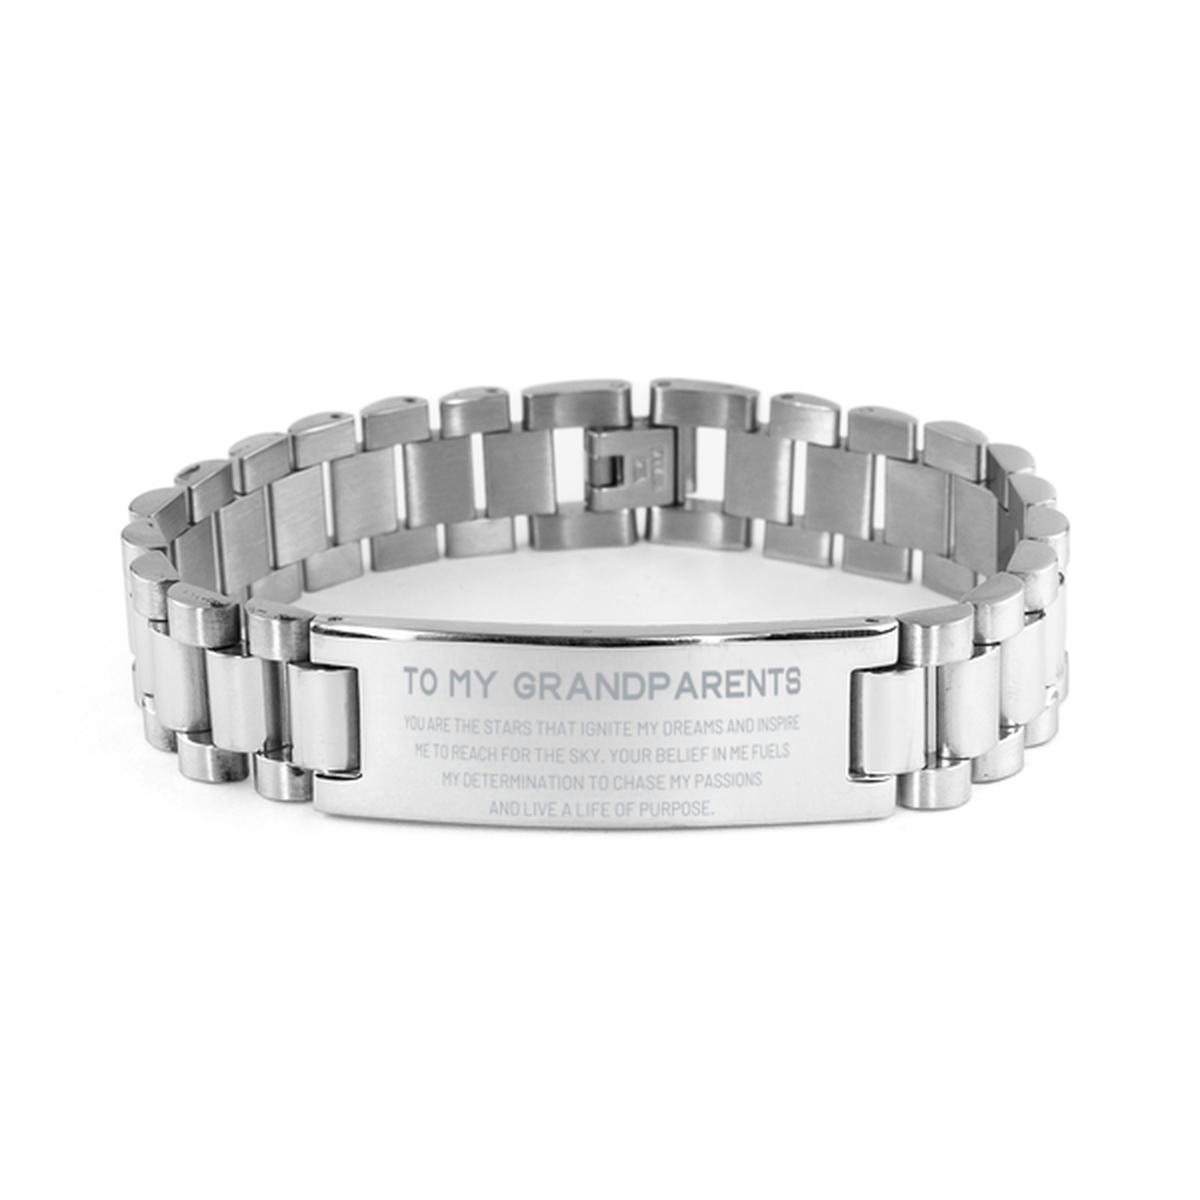 To My Grandparents Ladder Stainless Steel Bracelet, You are the stars that ignite my dreams and inspire me to reach for the sky, Birthday Unique Gifts For Grandparents, Thank You Gifts For Grandparents